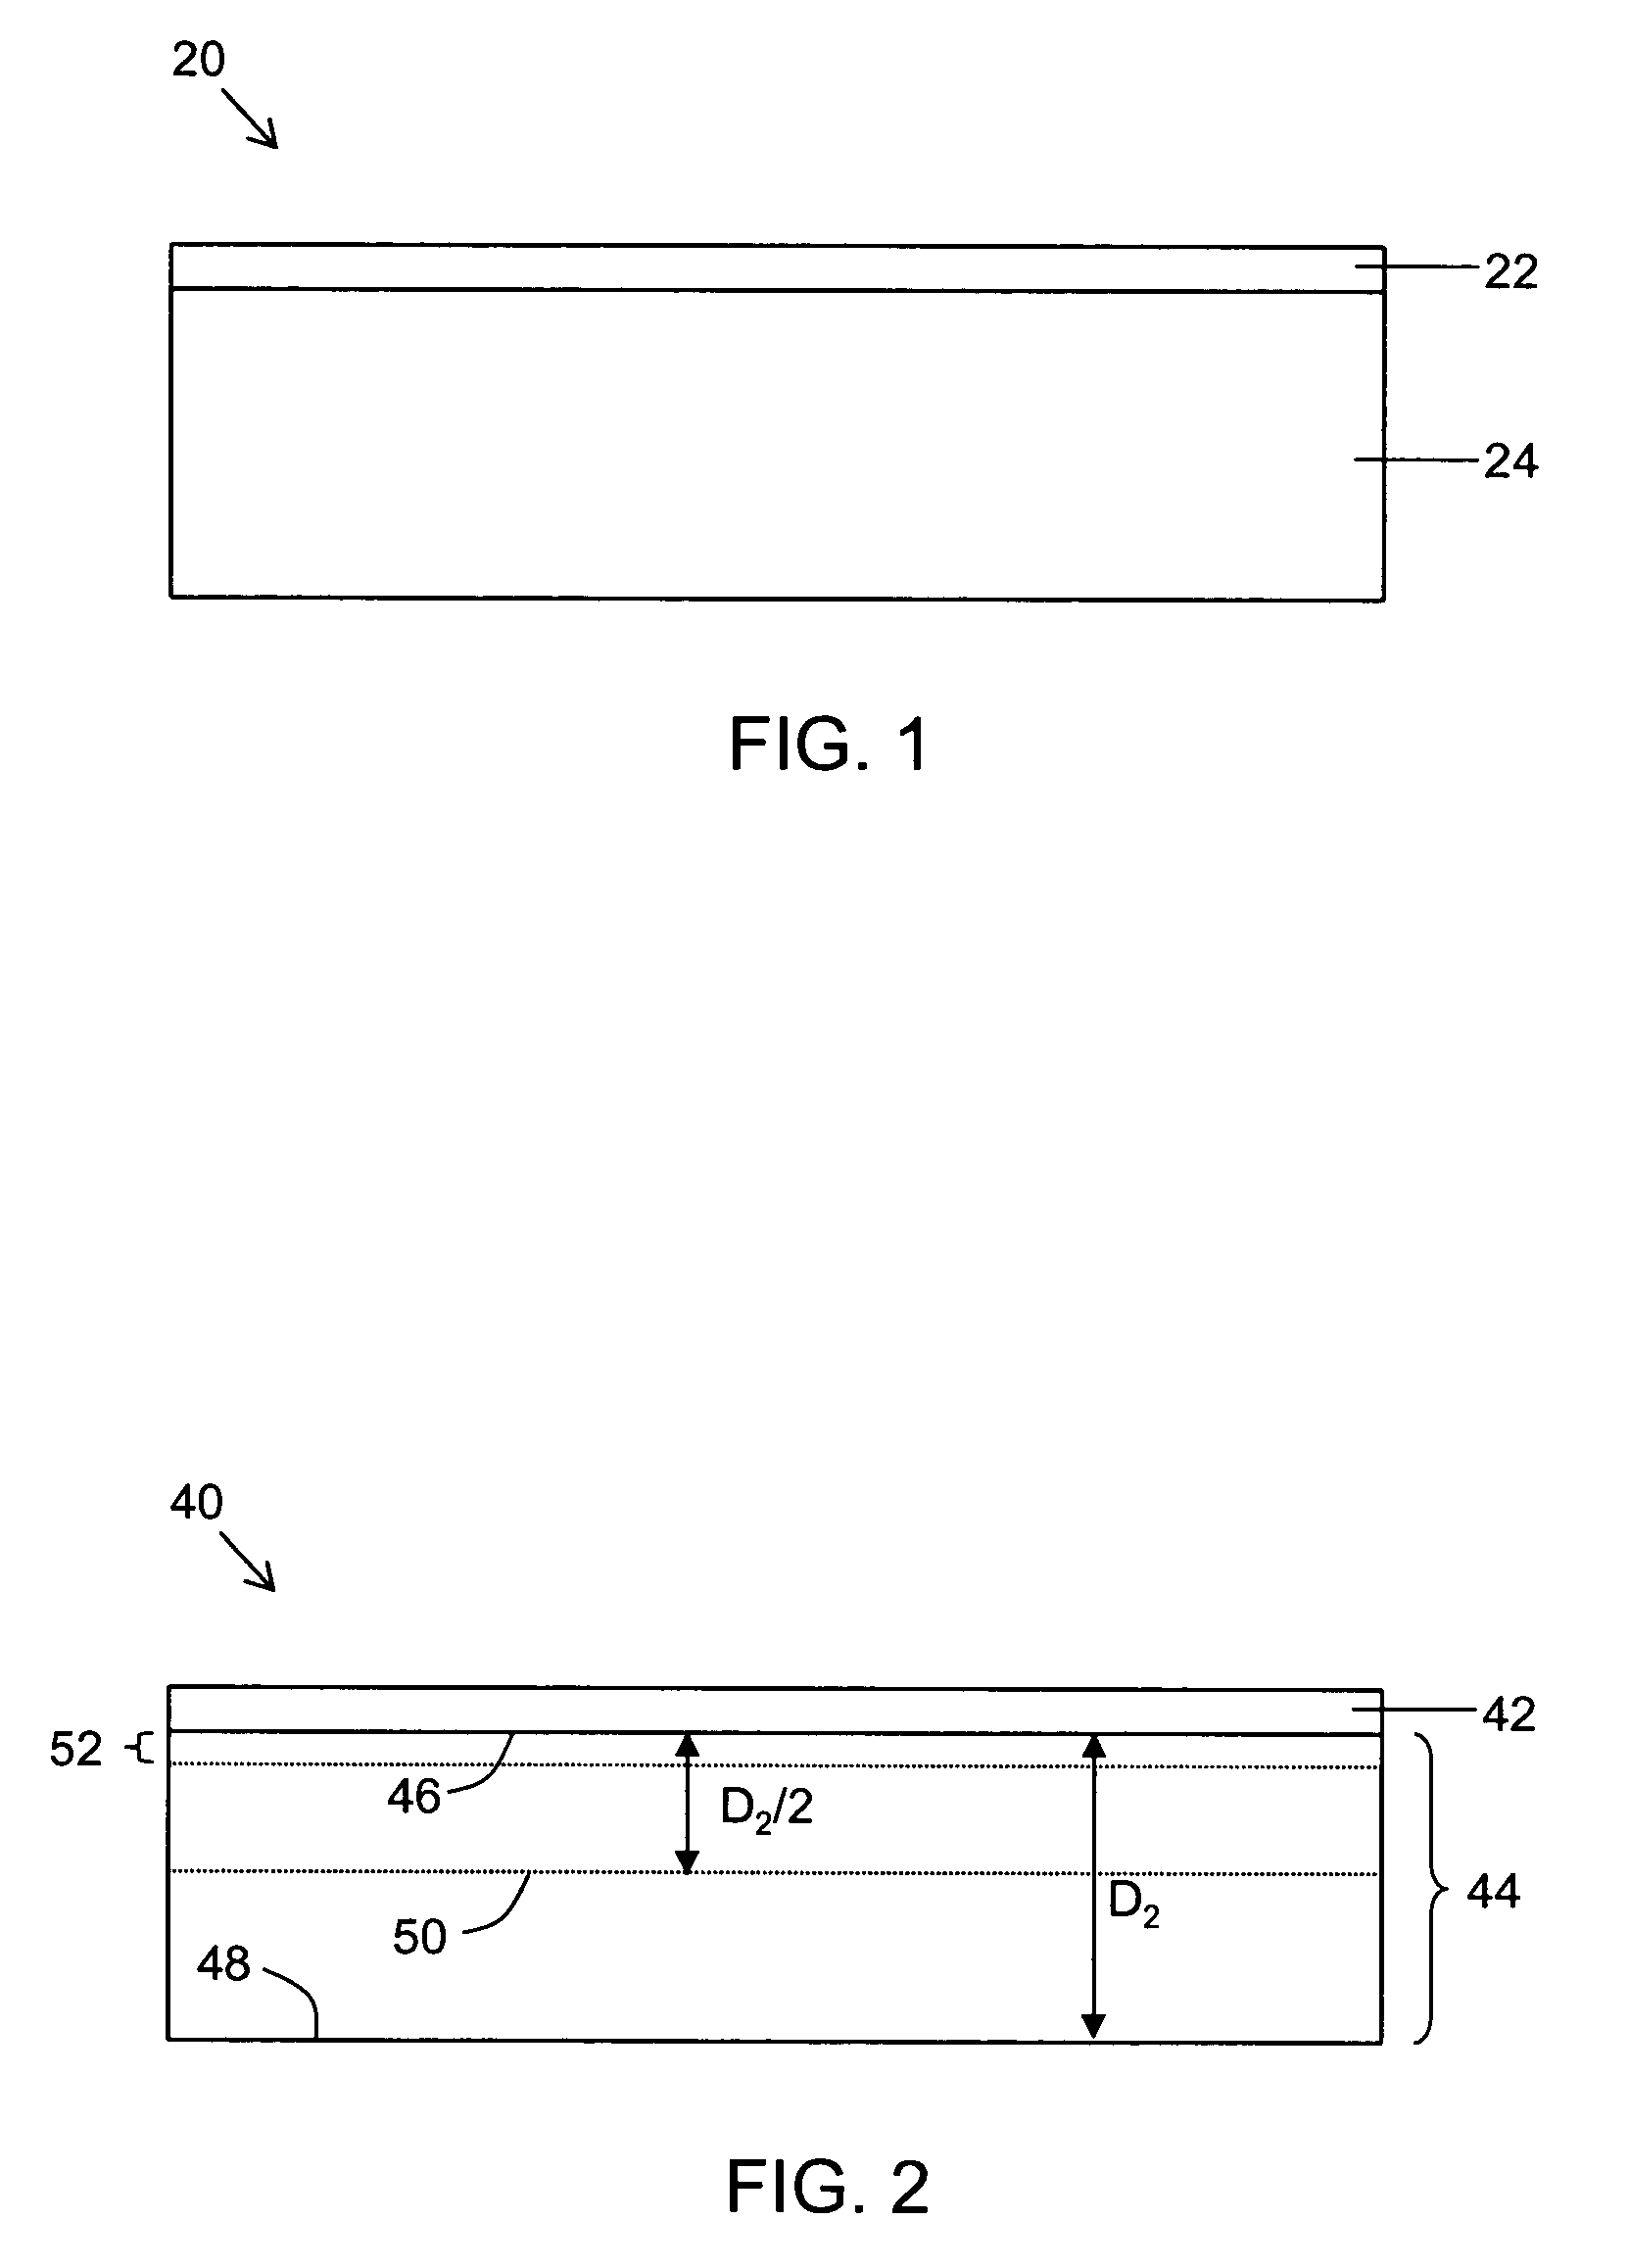 Strained semiconductor-on-insulator structures and methods for making strained semiconductor-on-insulator structures